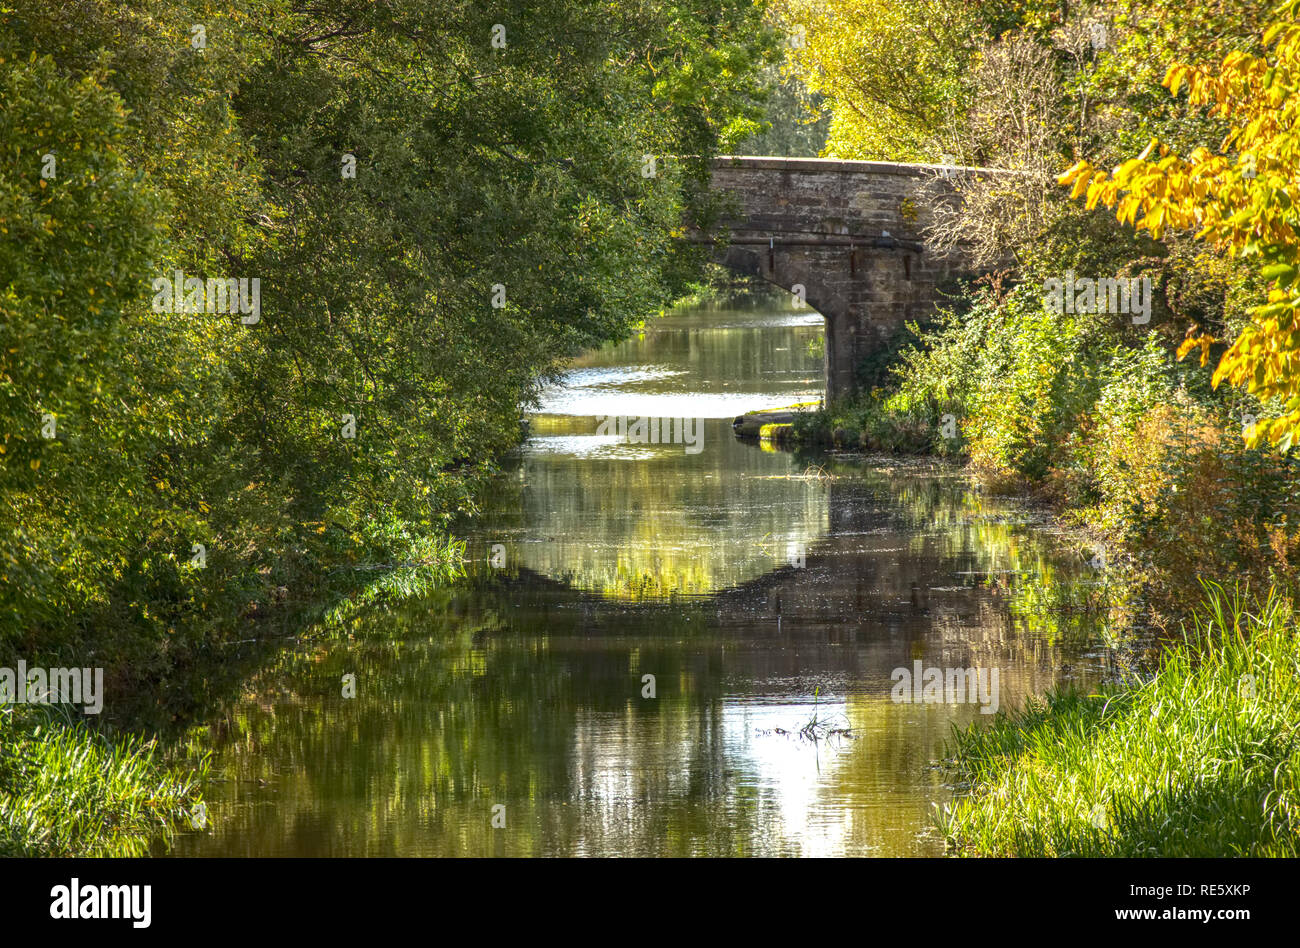 A stone bridge and it’s reflection on a quiet and calm  river in the autumn with leaves turning yellow. Stock Photo